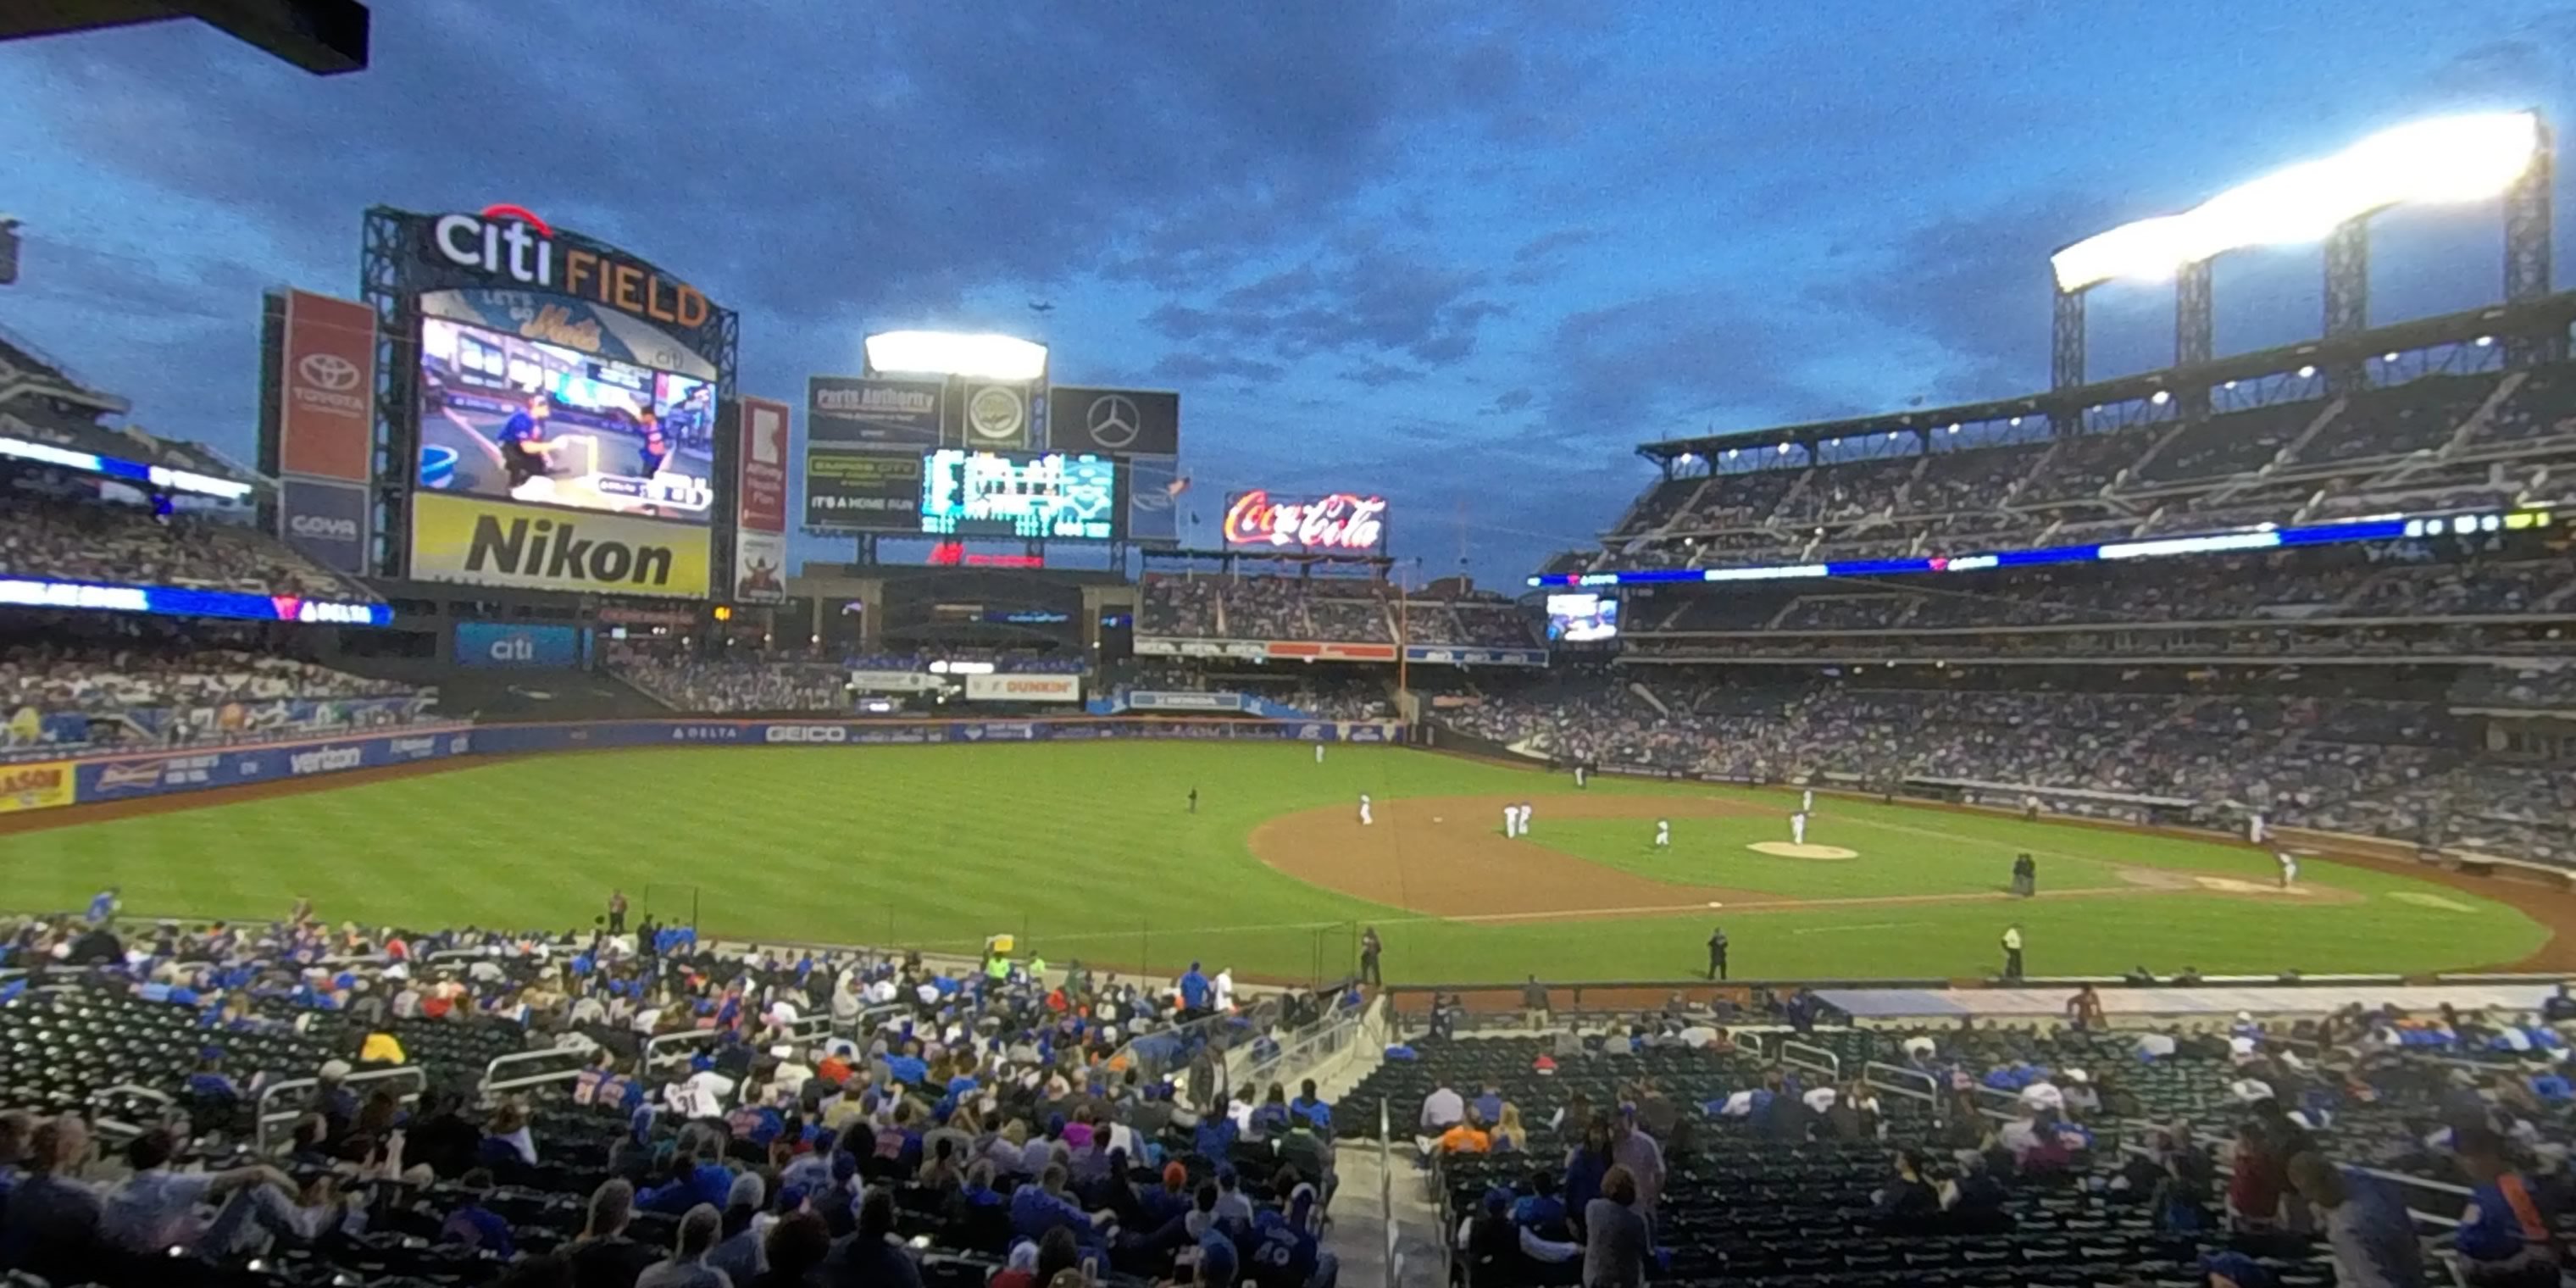 section 124 panoramic seat view  - citi field